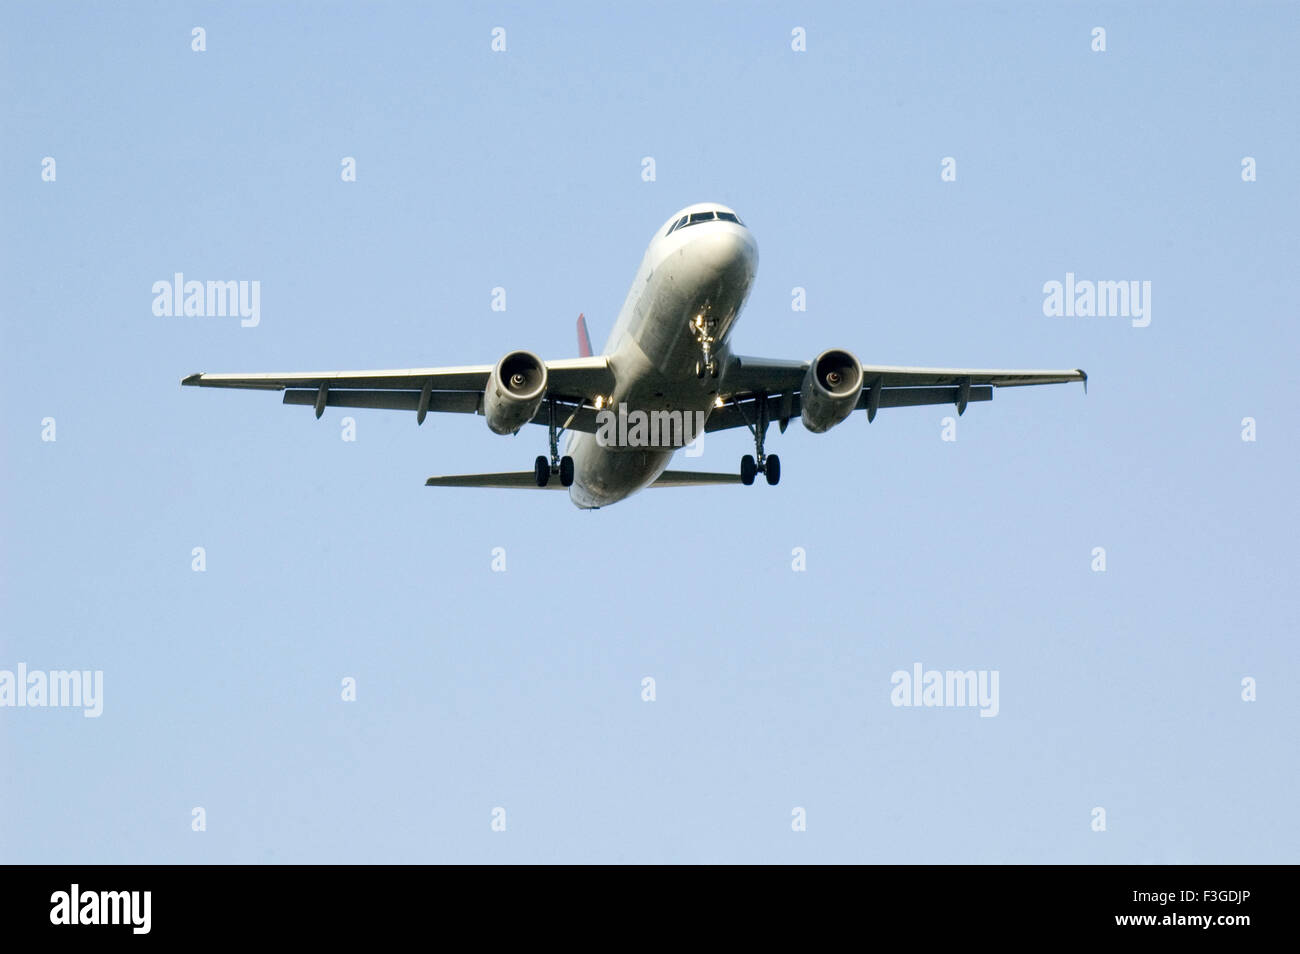 Airplane flying in sky Banque D'Images